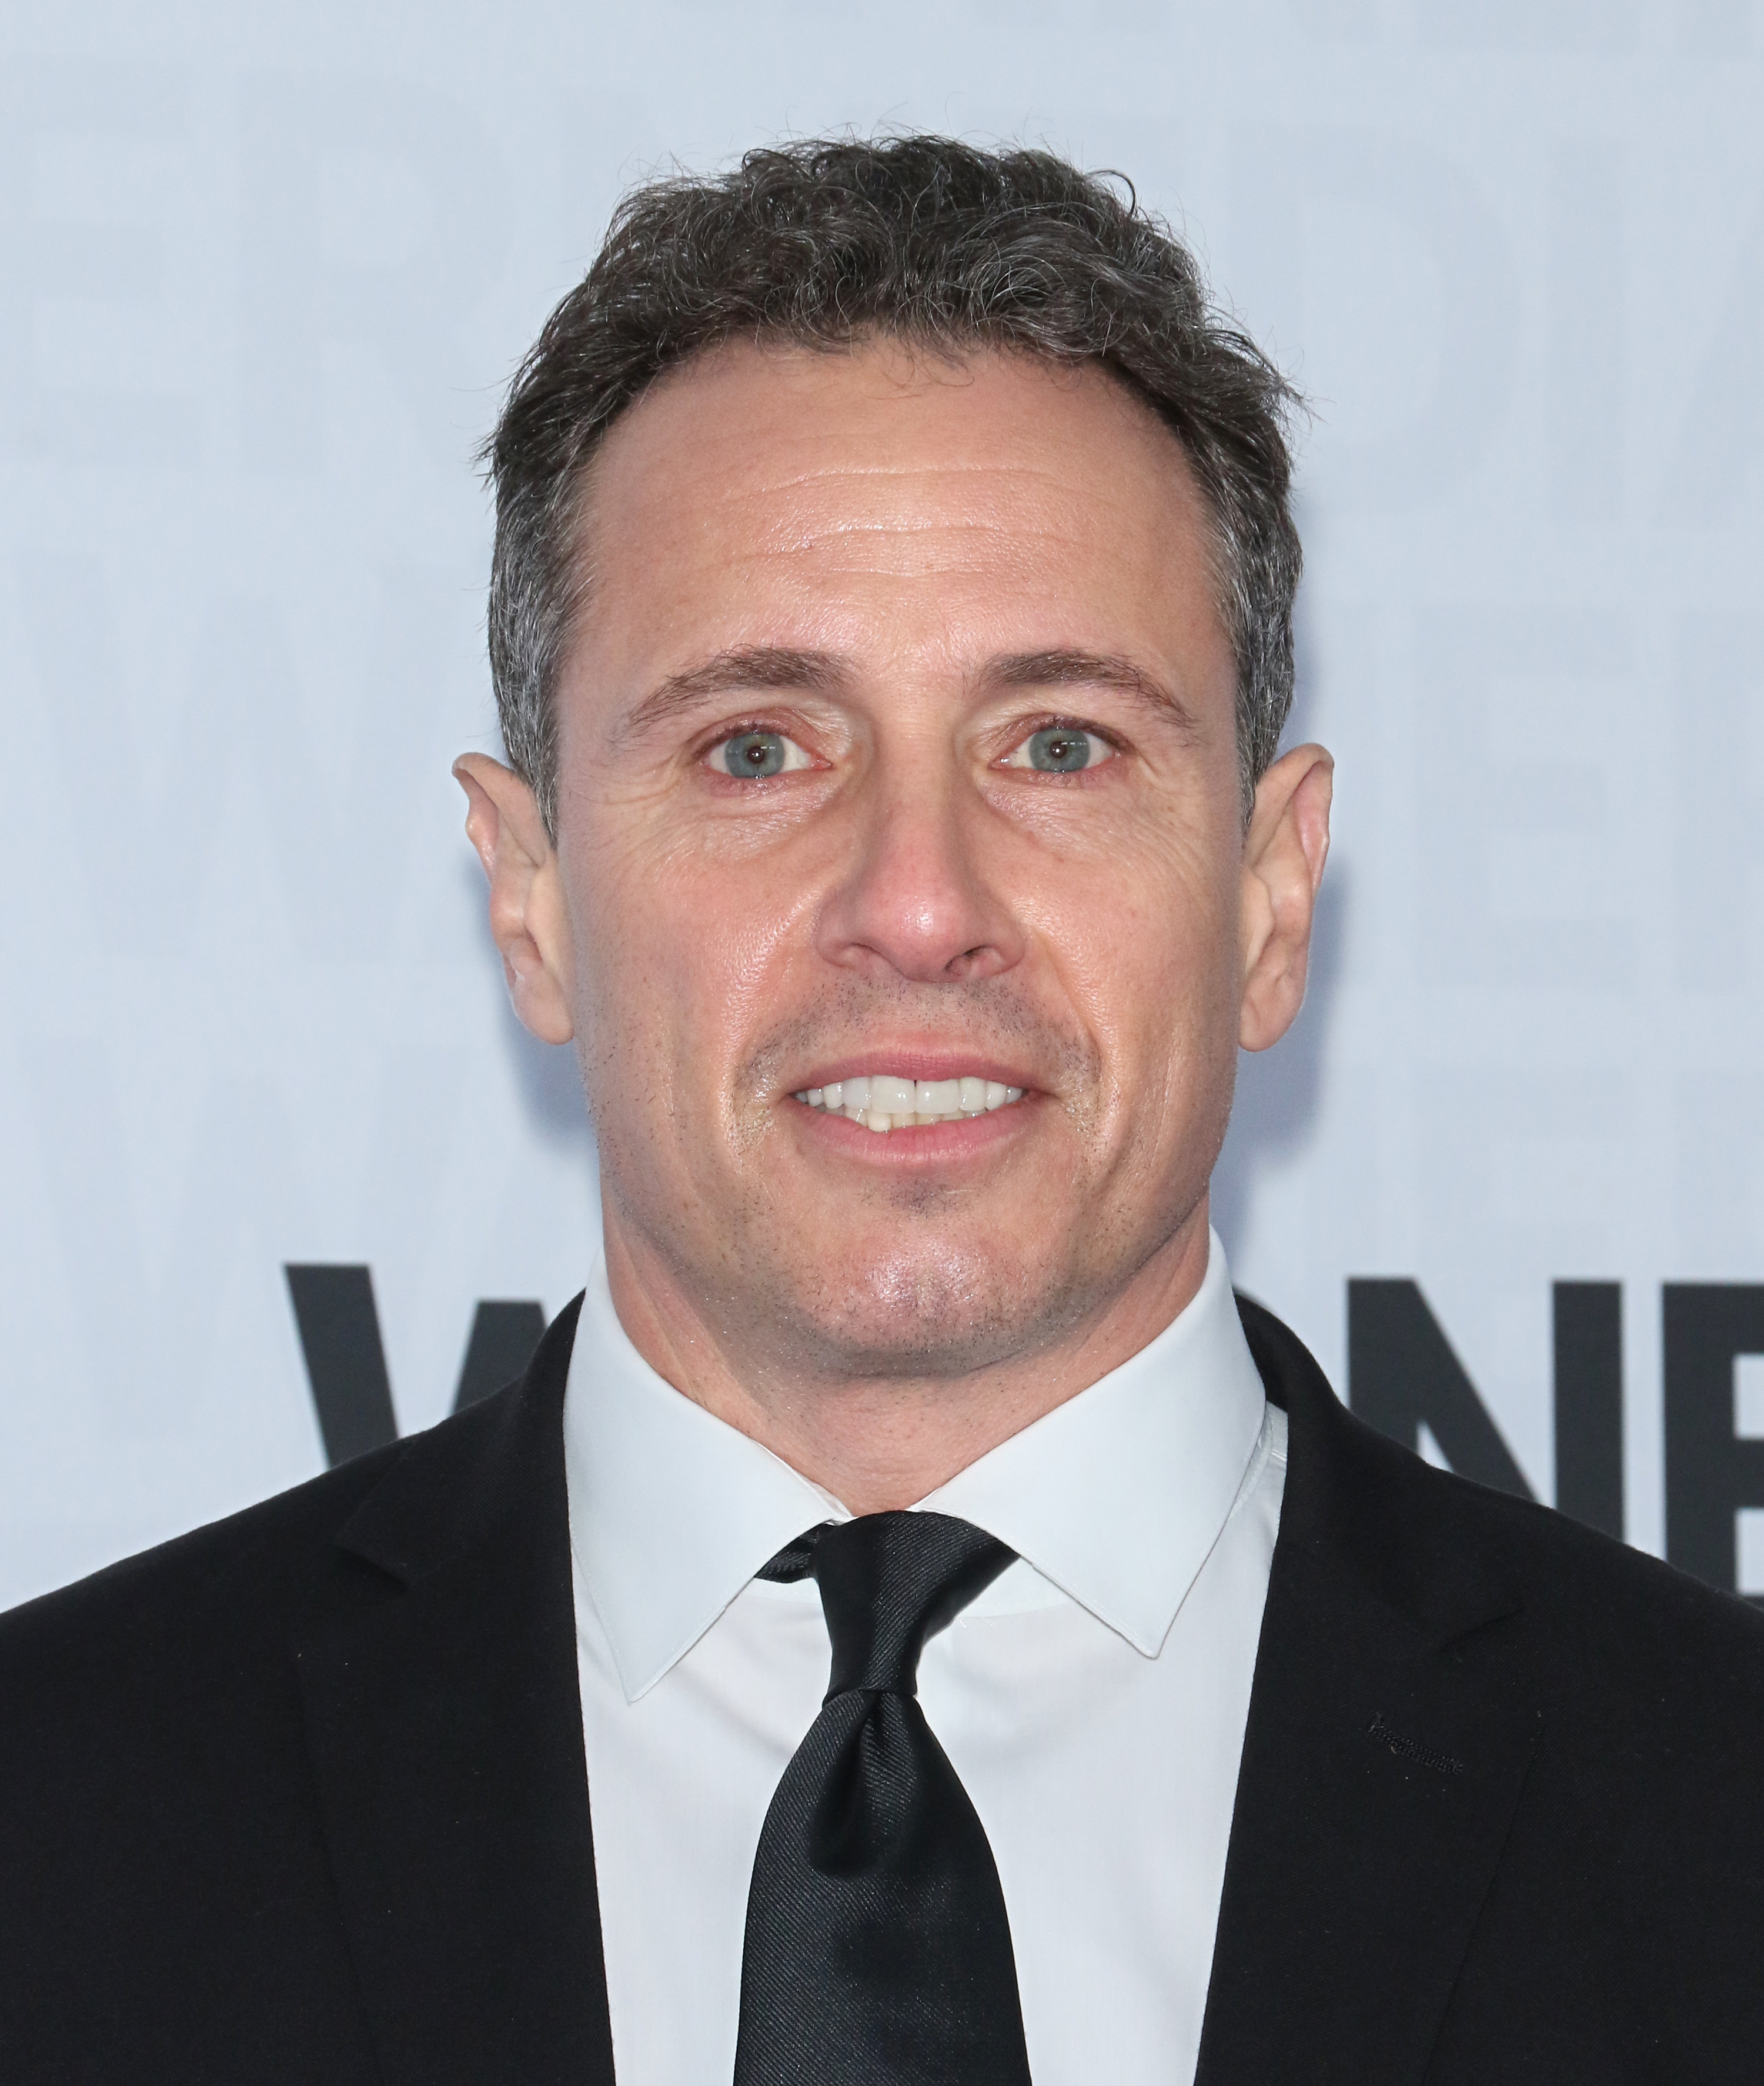 Chris Cuomo smiles in a suit